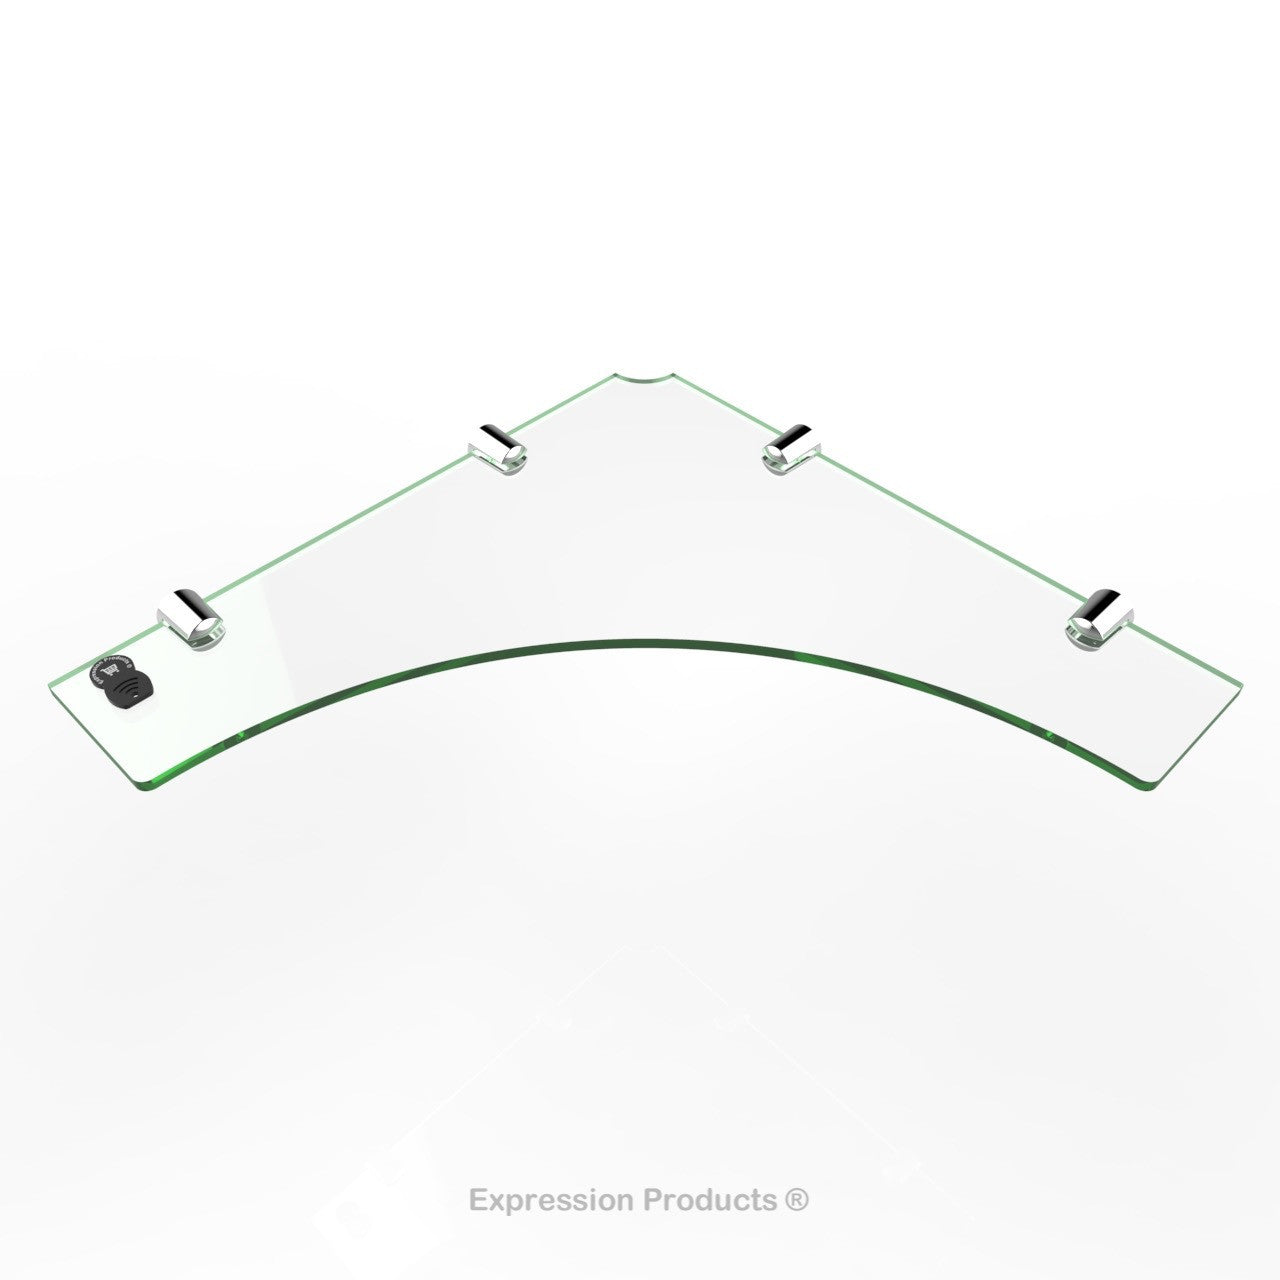 Corner Acrylic Shelf With Cable Feed Through - Style 004 - Expression Products Ltd